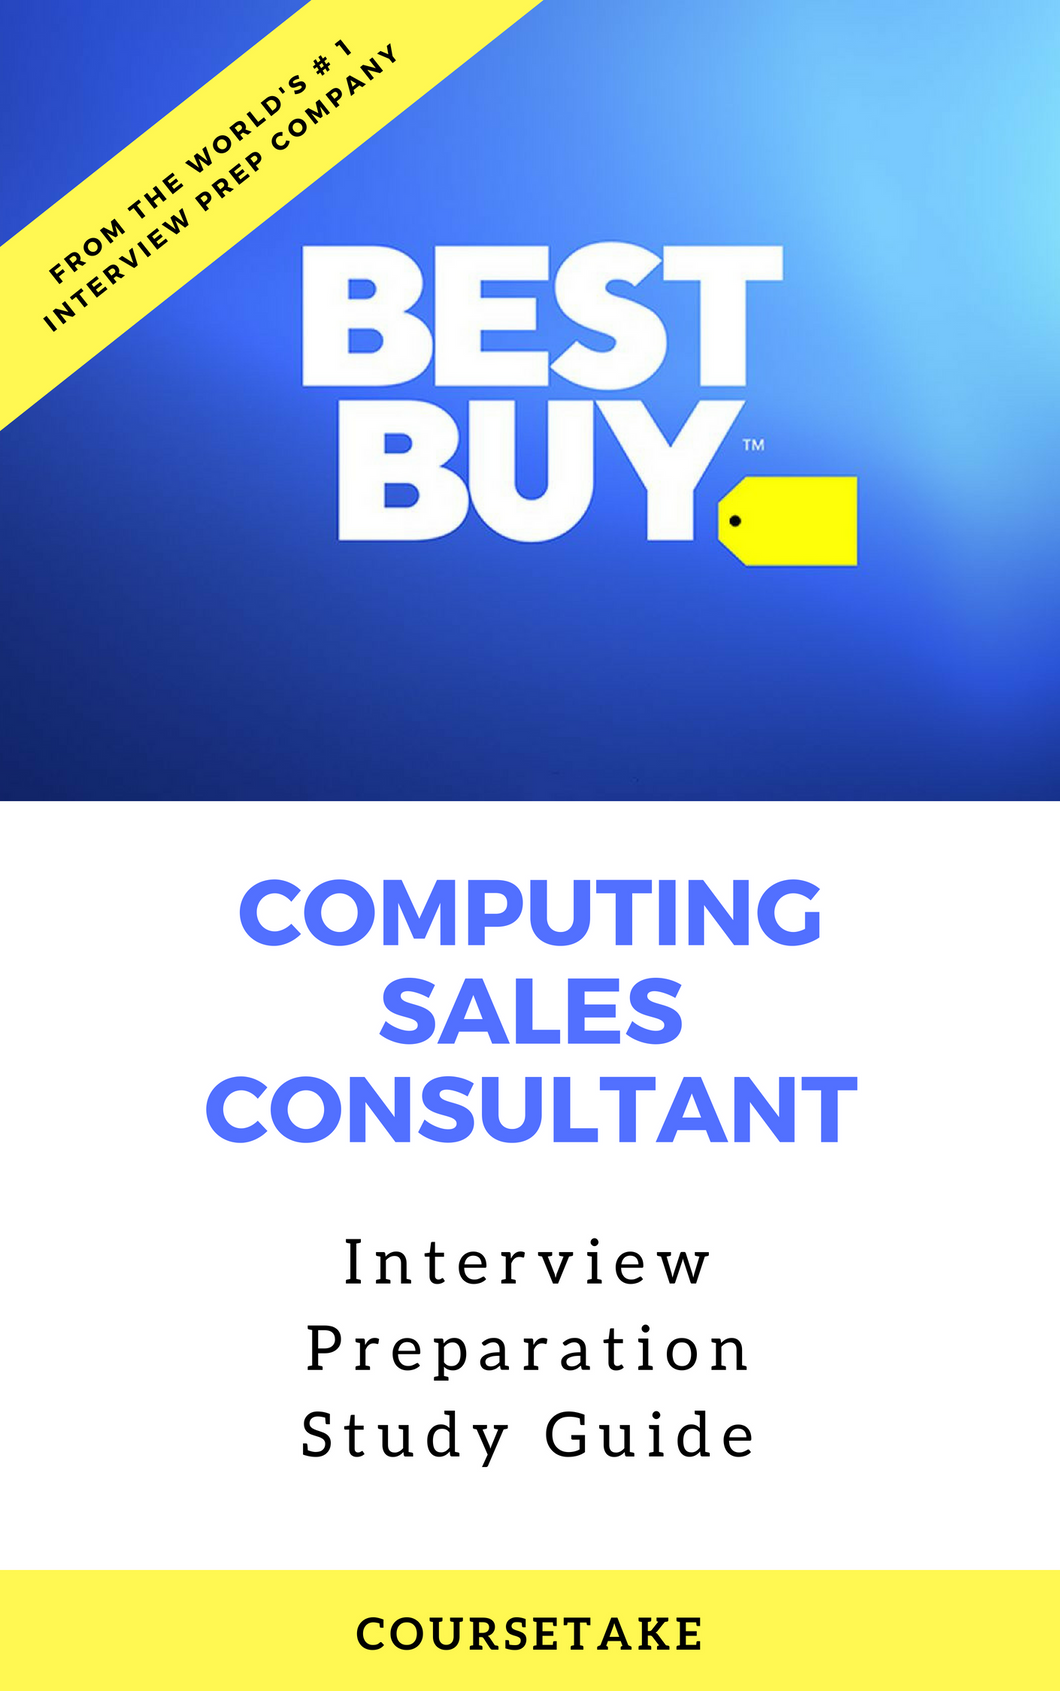 Best Buy Computing Sales Consultant Interview Preparation Study Guide